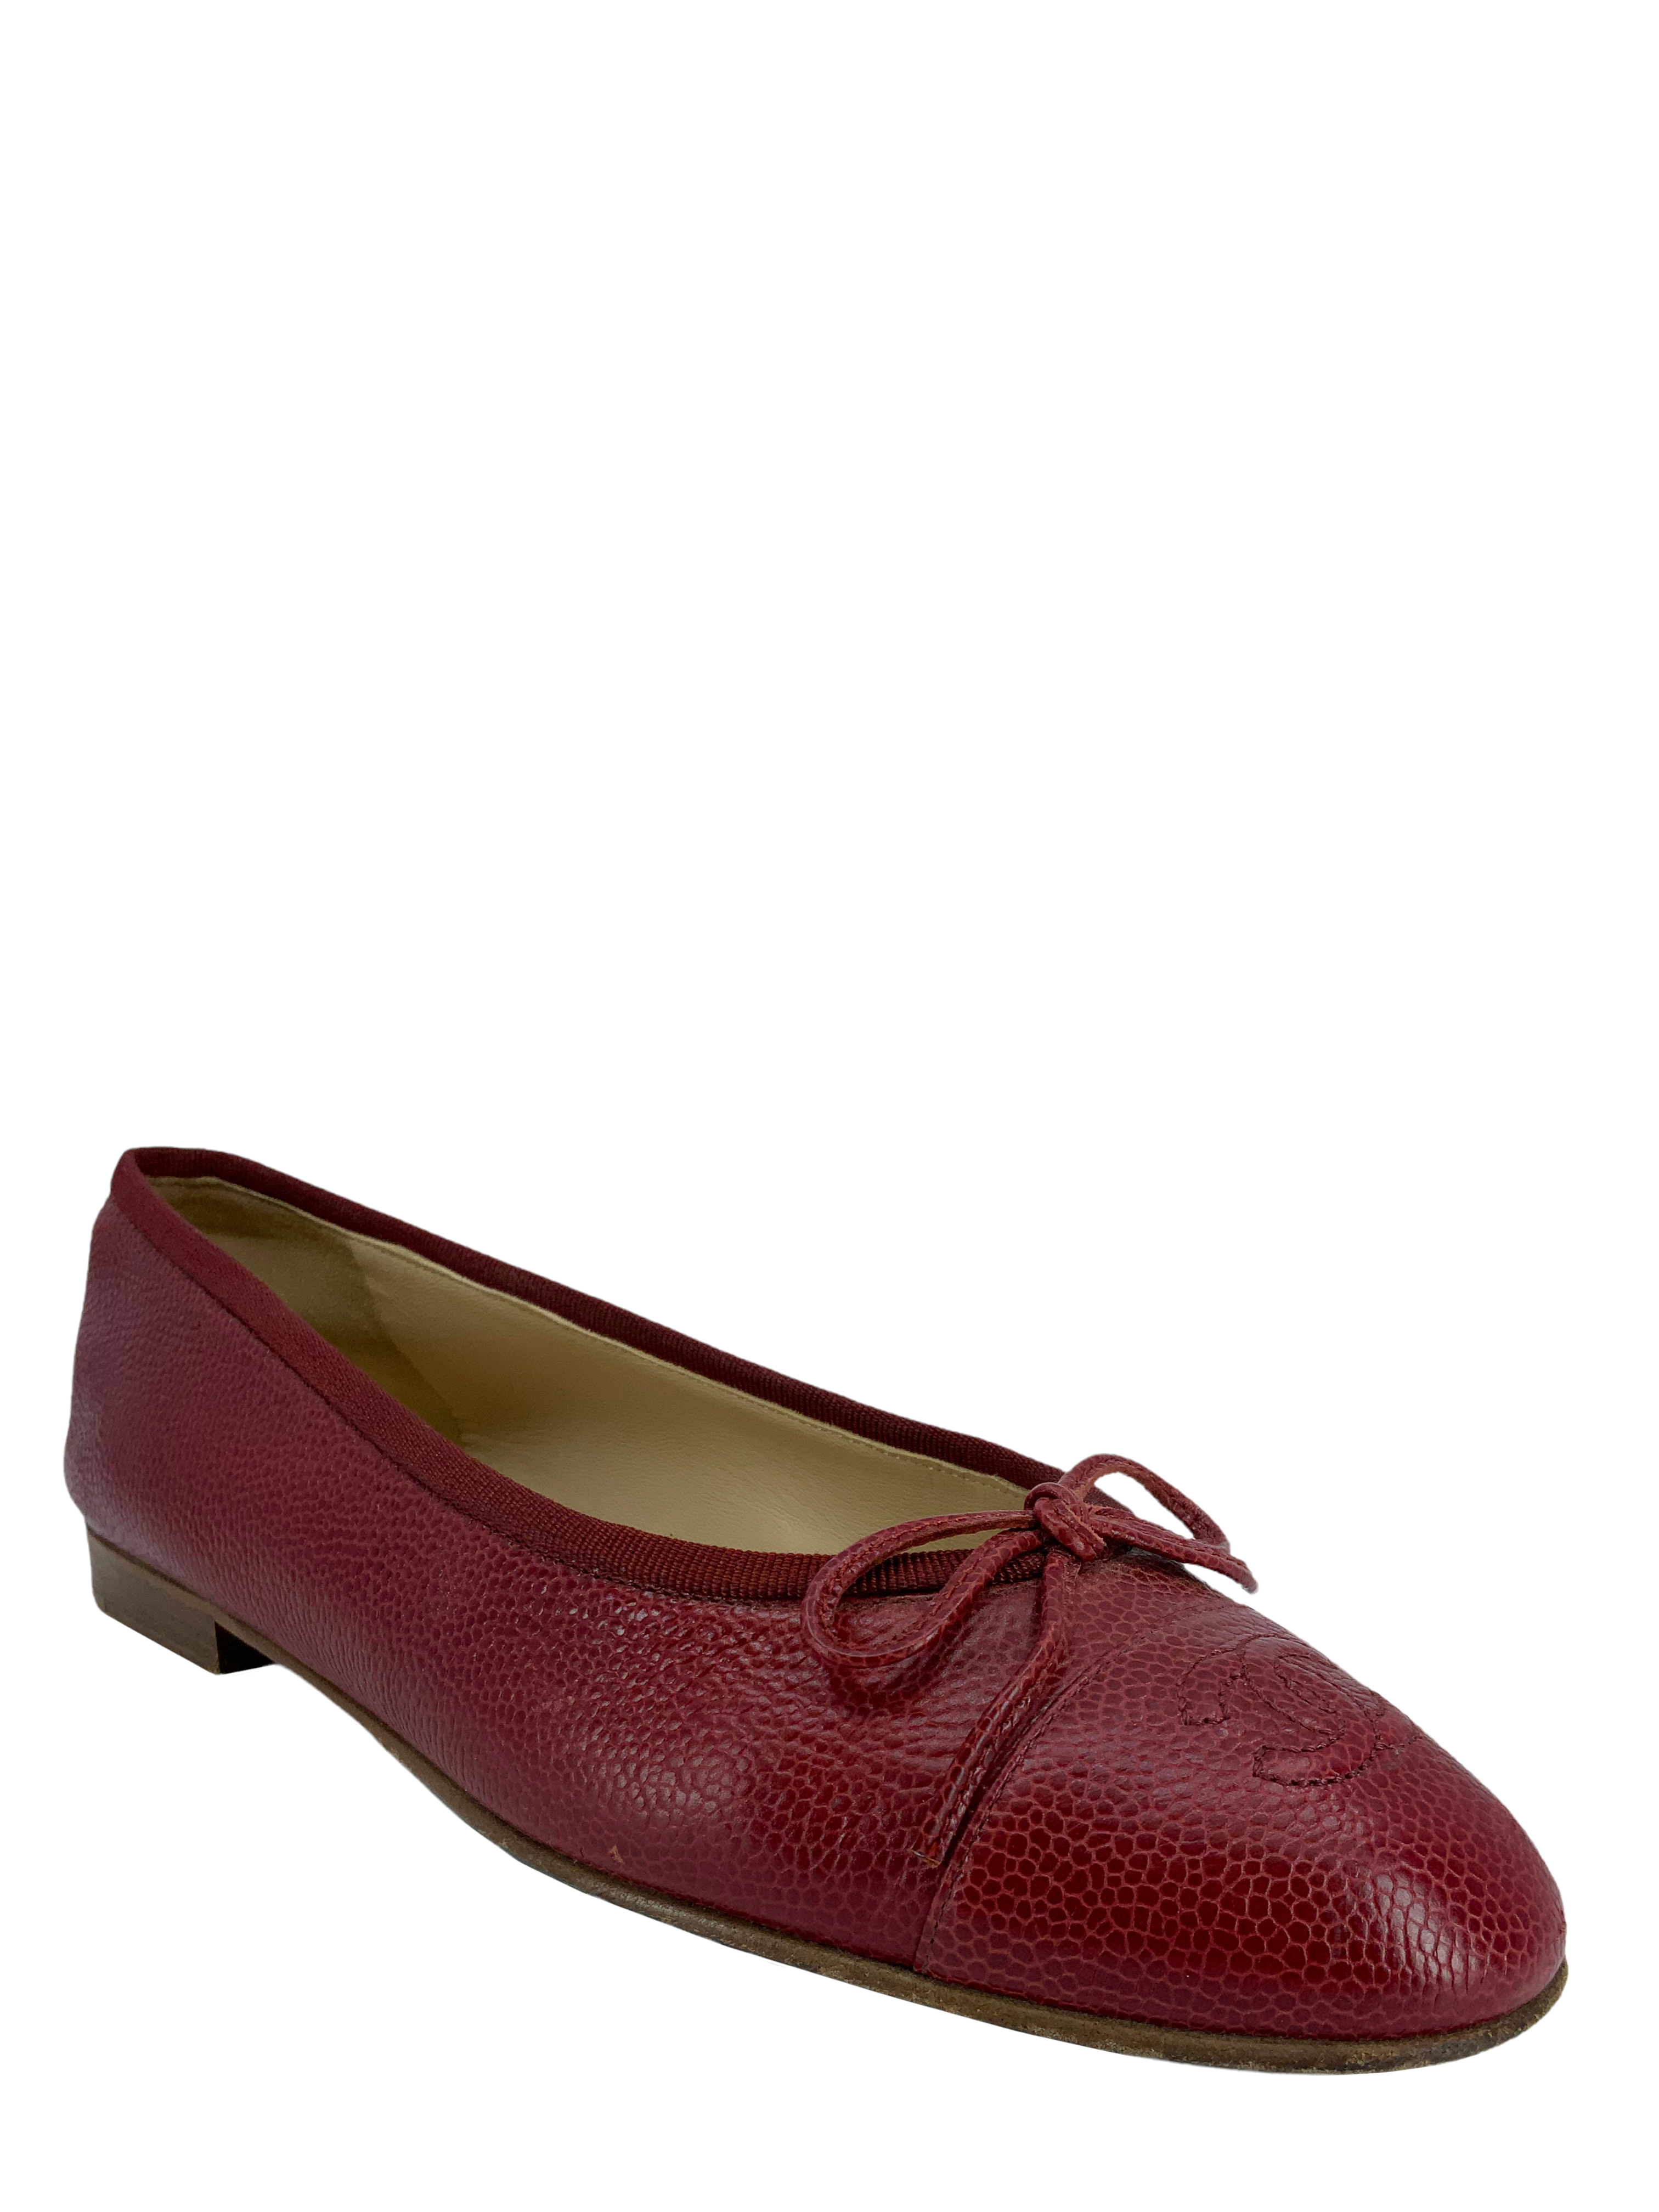 CHANEL Red Patent Leather CC Logo Ballet Flats